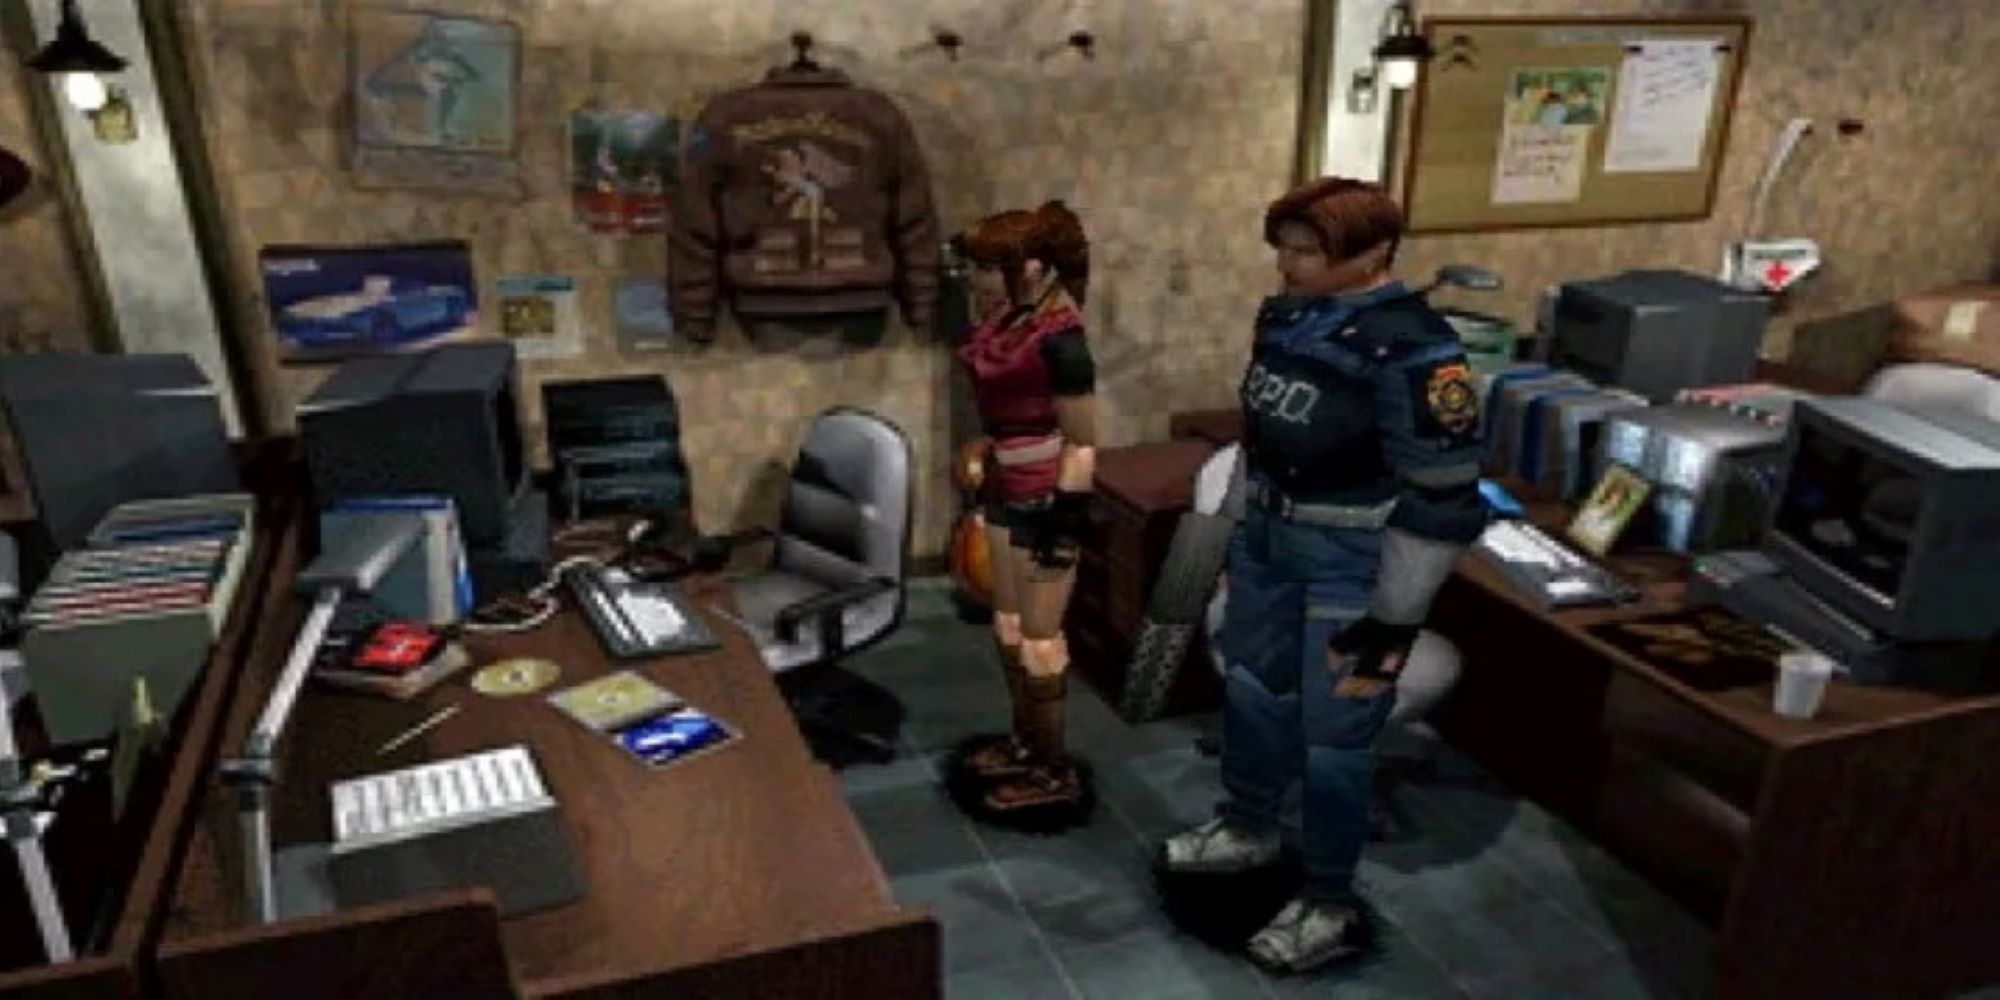 Leon Kennedy and Claire Redfield from Resident Evil 2 in the S.T.A.R.S. room of the RPD police station